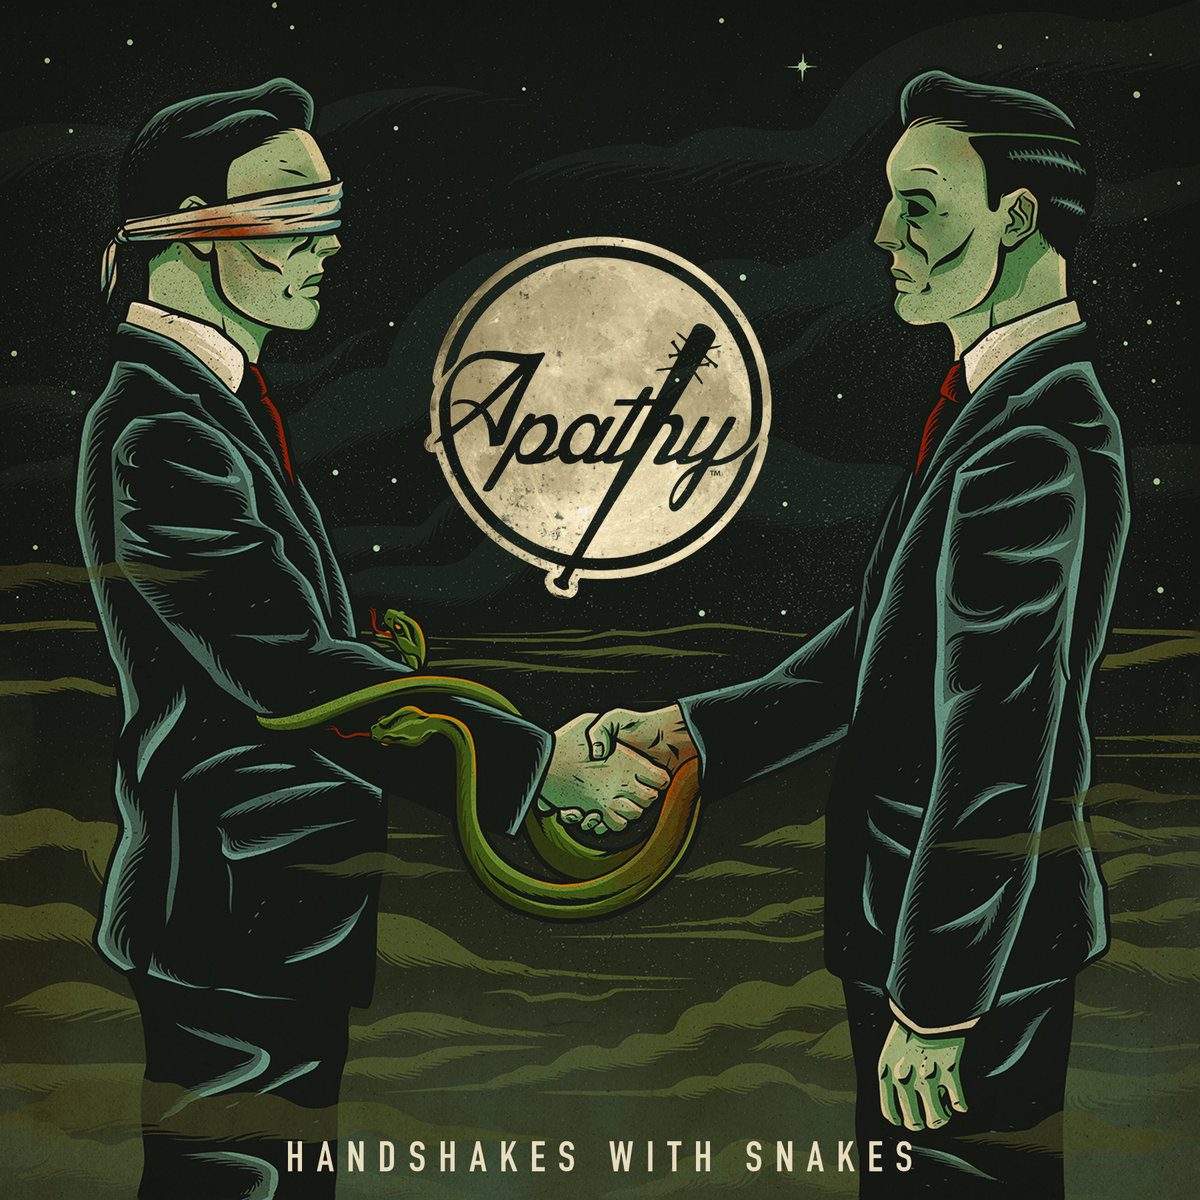 Apathy - "Handshakes With Snakes" New Album